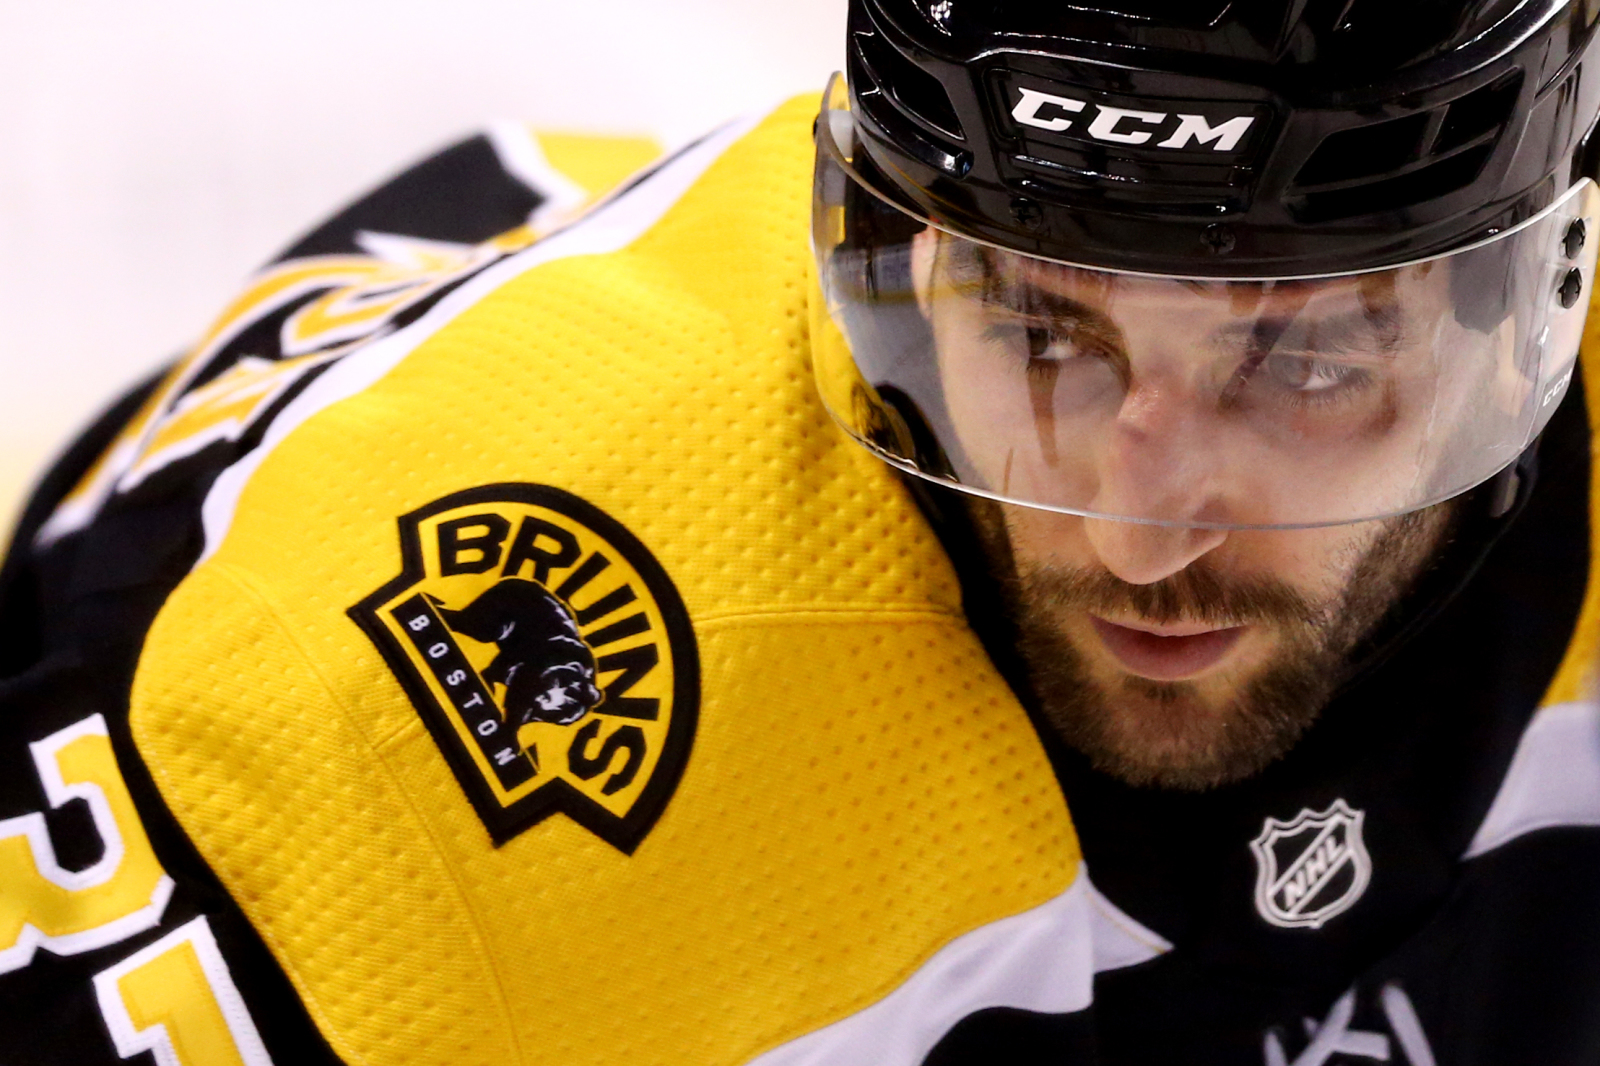 CCM Hockey on X: Let's celebrate Patrice Bergeron today! Comment